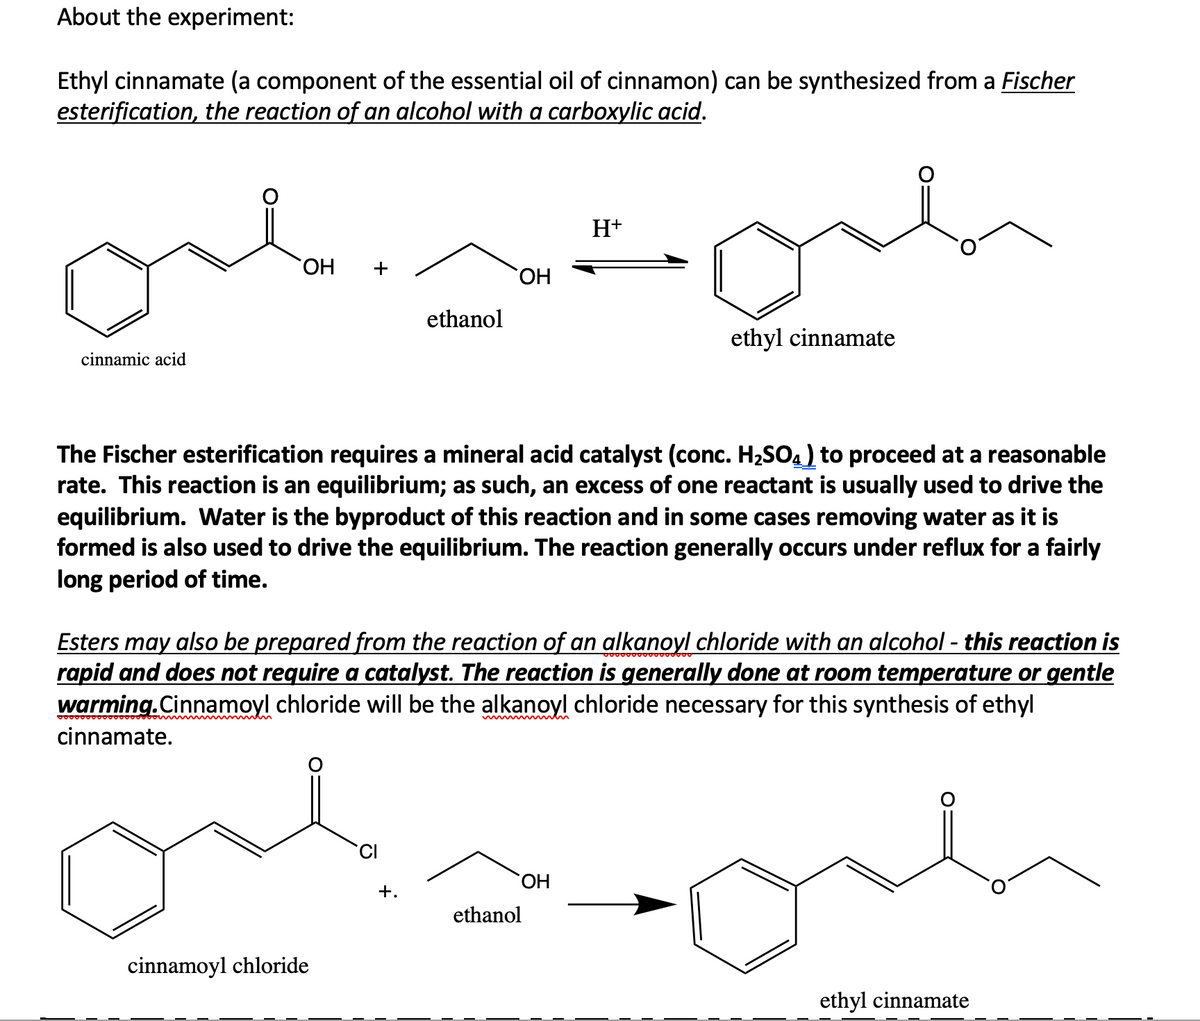 About the experiment:
Ethyl cinnamate (a component of the essential oil of cinnamon) can be synthesized from a Fischer
esterification, the reaction of an alcohol with a carboxylic acid.
H+
+
HO.
ethanol
ethyl cinnamate
cinnamic acid
The Fischer esterification requires a mineral acid catalyst (conc. H2SO4) to proceed at a reasonable
rate. This reaction is an equilibrium; as such, an excess of one reactant is usually used to drive the
equilibrium. Water is the byproduct of this reaction and in some cases removing water as it is
formed is also used to drive the equilibrium. The reaction generally occurs under reflux for a fairly
long period of time.
Esters may also be prepared from the reaction of an alkanoyl chloride with an alcohol - this reaction is
rapid and does not require a catalyst. The reaction is generally done at room temperature or gentle
warming.Cinnamoyl chloride will be the alkanoyl chloride necessary for this synthesis of ethyl
cinnamate.
CI
+.
ethanol
cinnamoyl chloride
ethyl cinnamate
